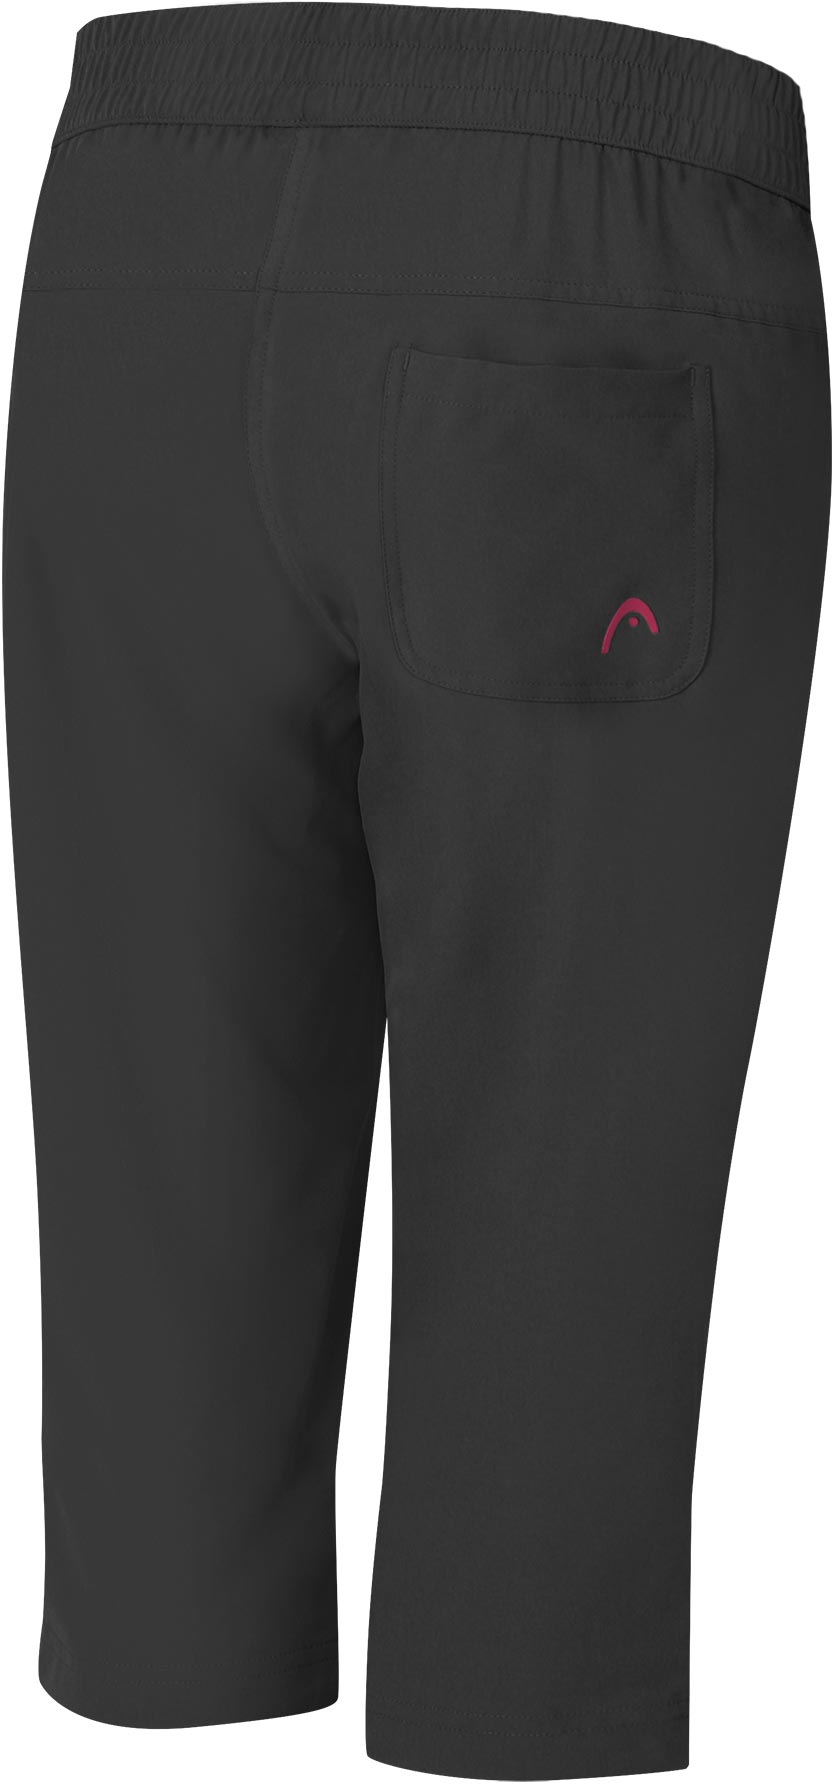 Women’s 3/4 lenght trousers